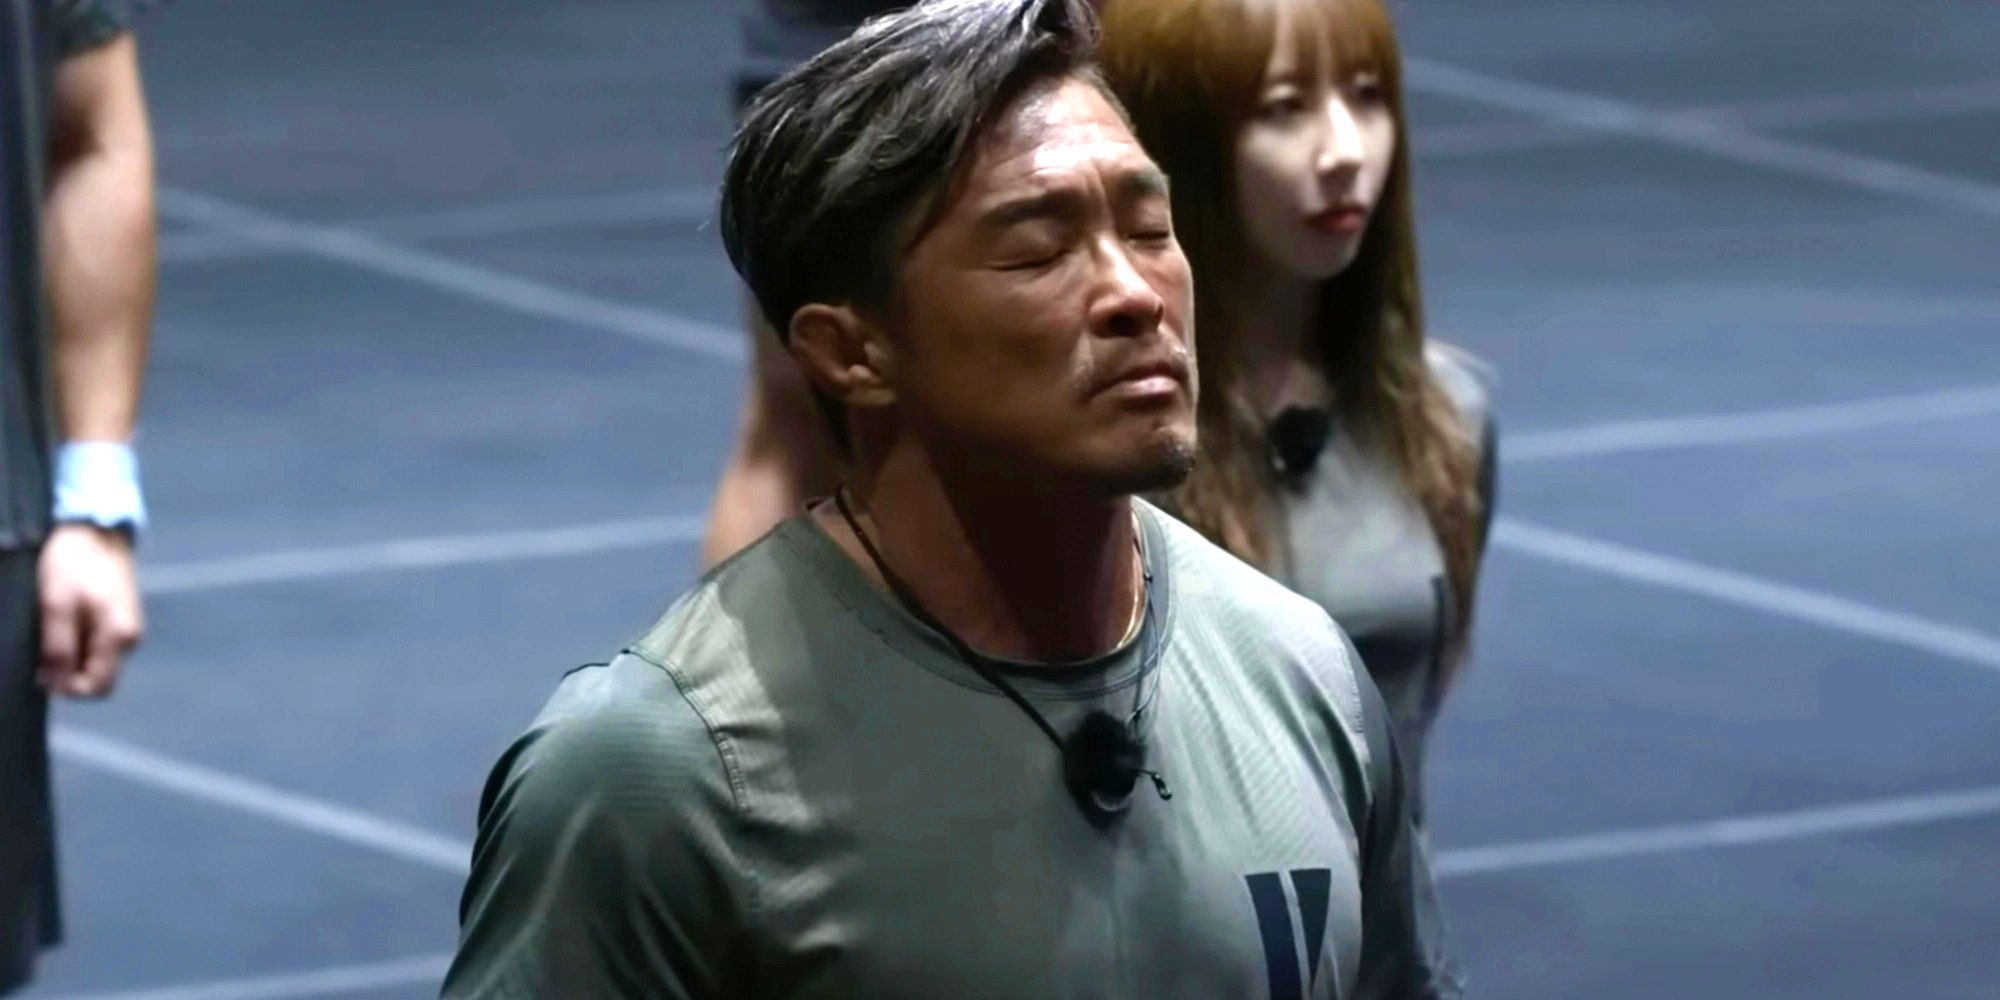 Physical 100 contestant Choo Sung-hoon. He is standing with his eyes closed in front of a few other competitors, wearing a gray tee shirt with a mic hanging around his neck. 